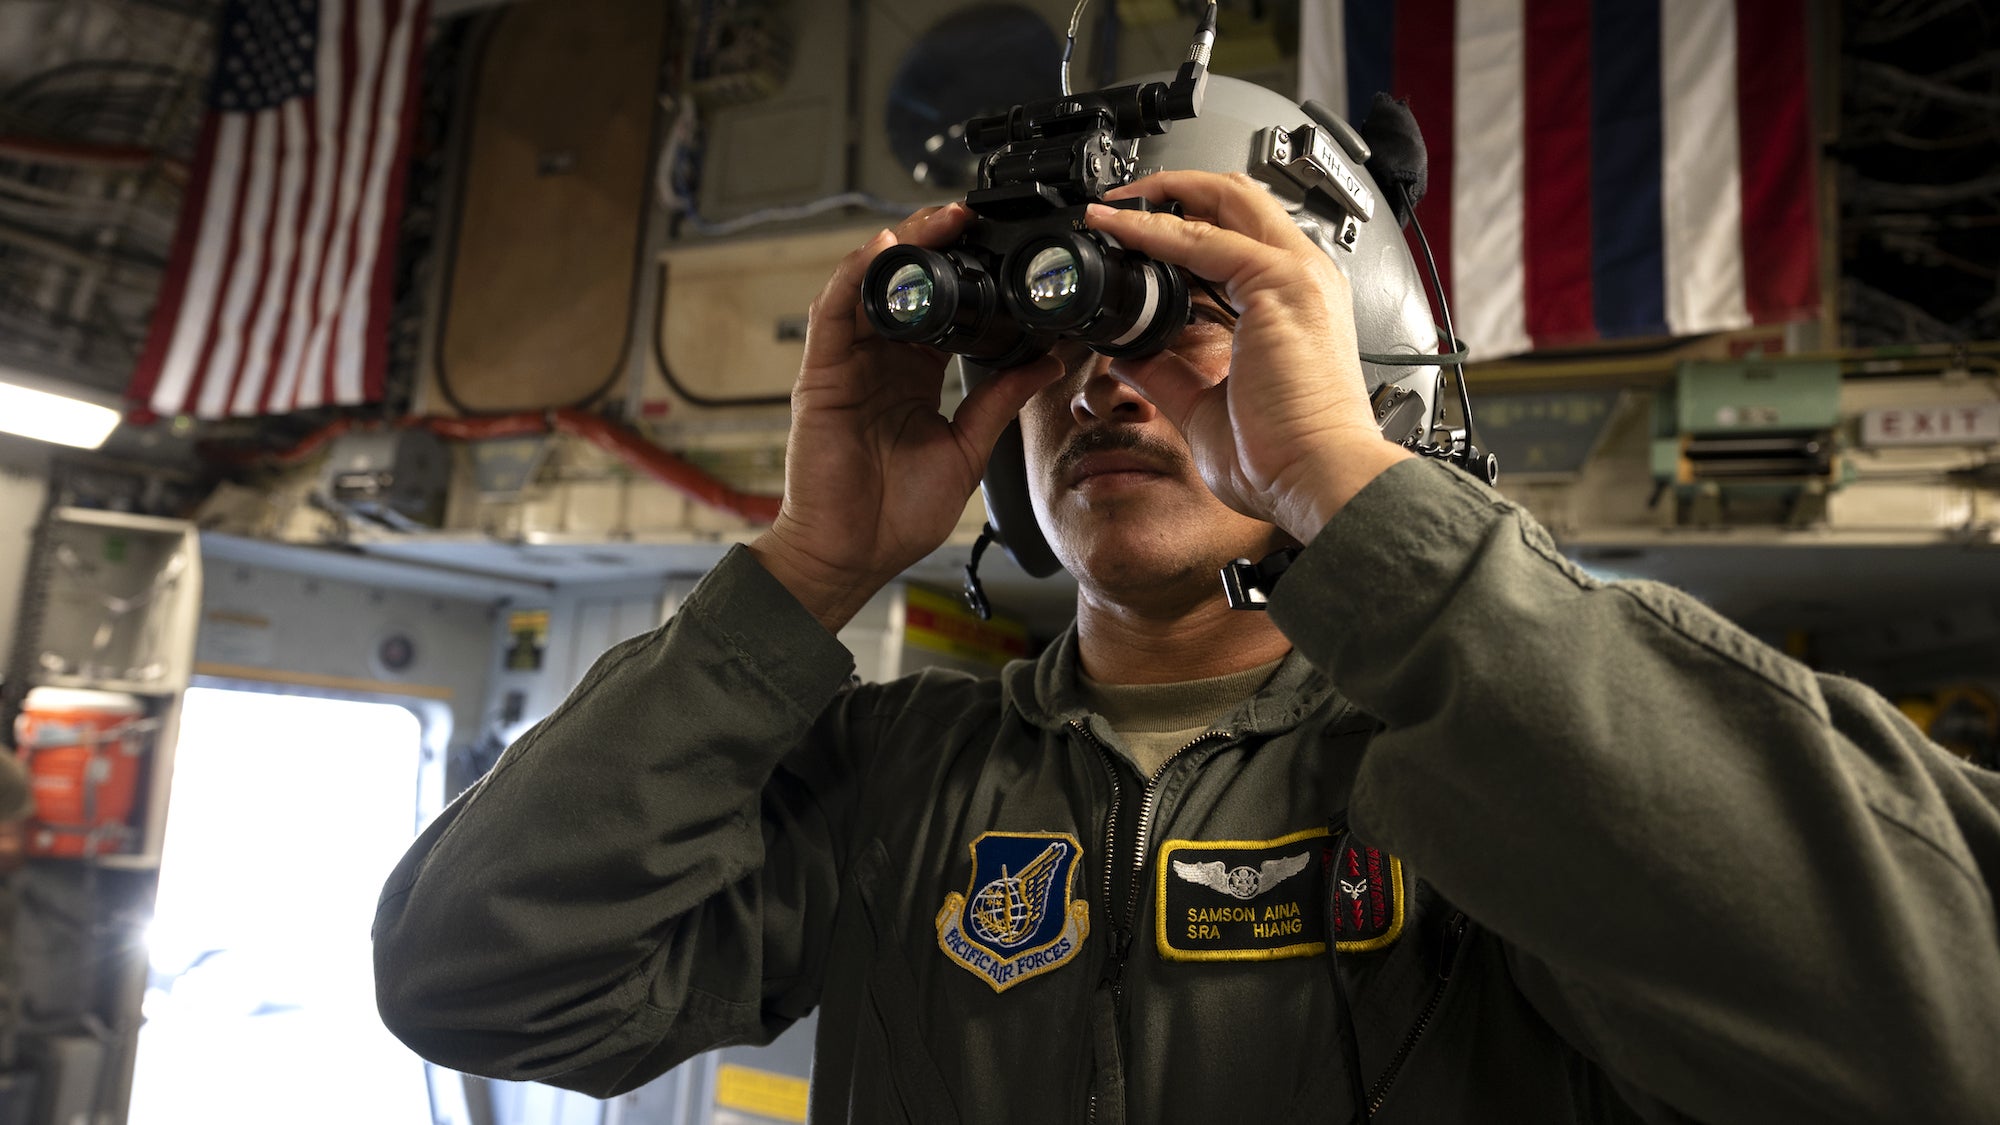 A member of the Hawaii Air National Guard holding night vision goggles up to his eyes.